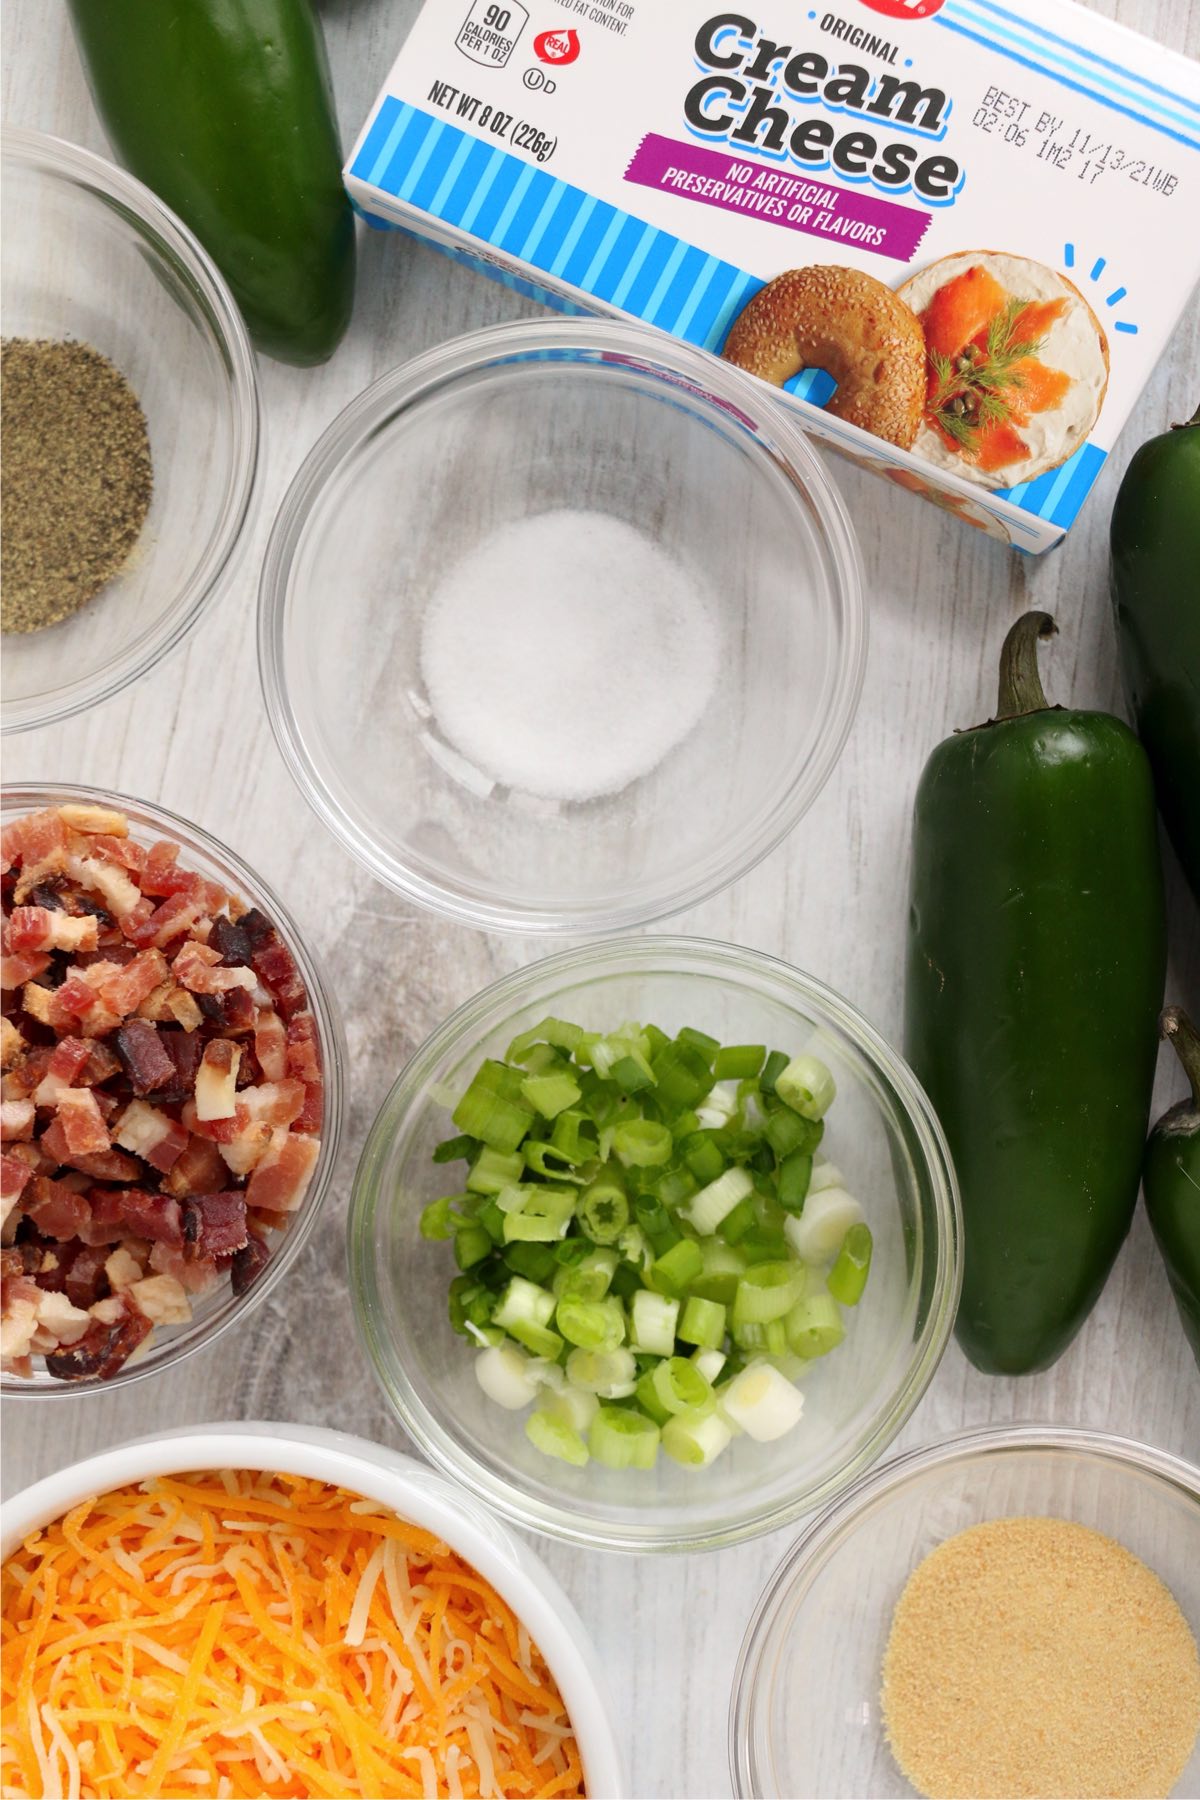 Overhead shot of ingredients in individual bowls